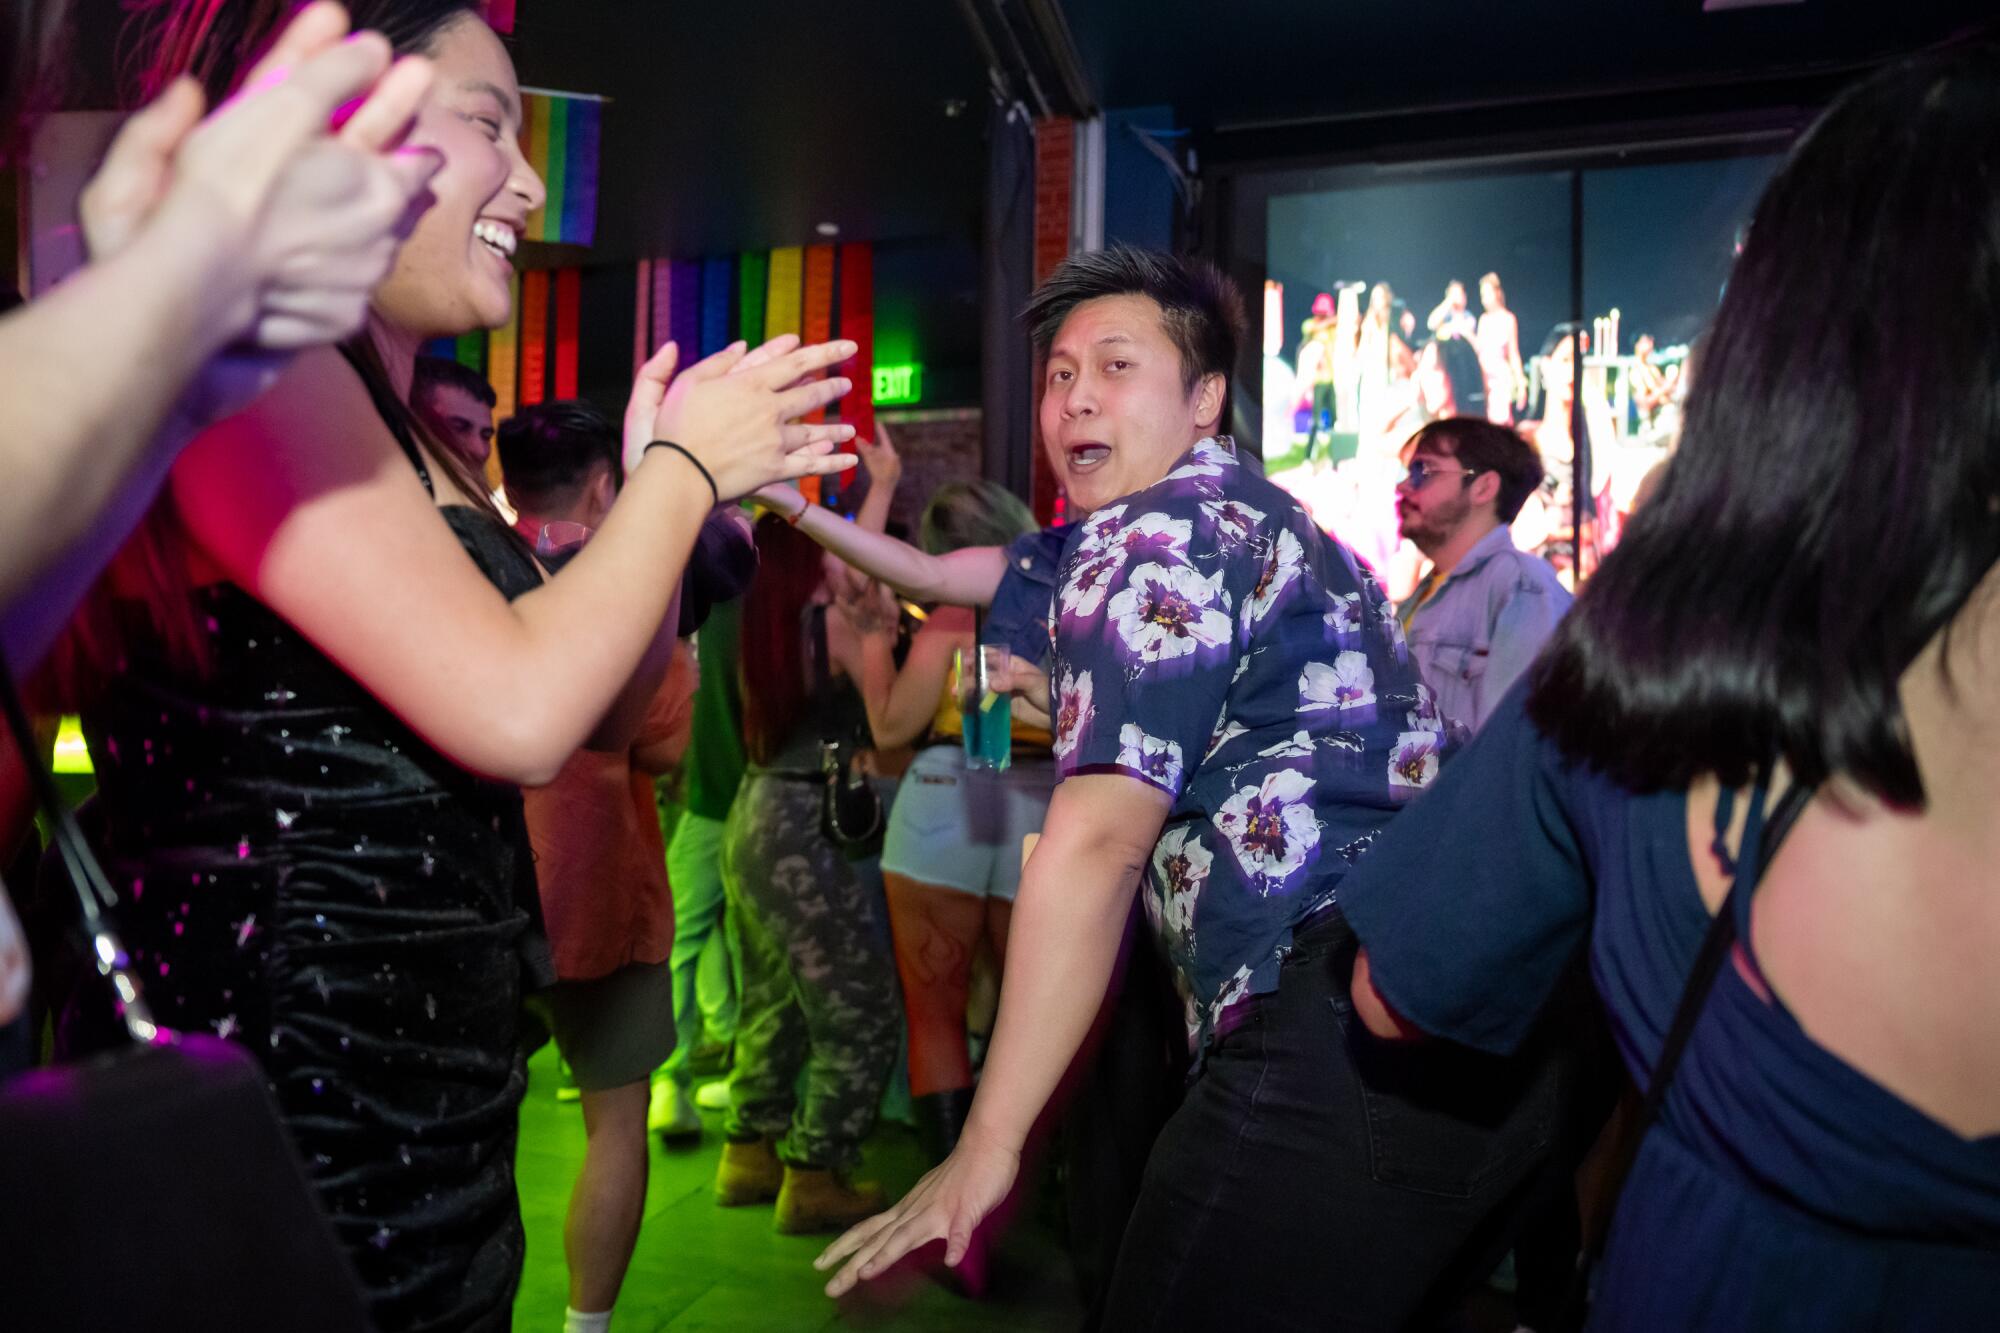 A night at the club where queer Asian Americans no longer feel